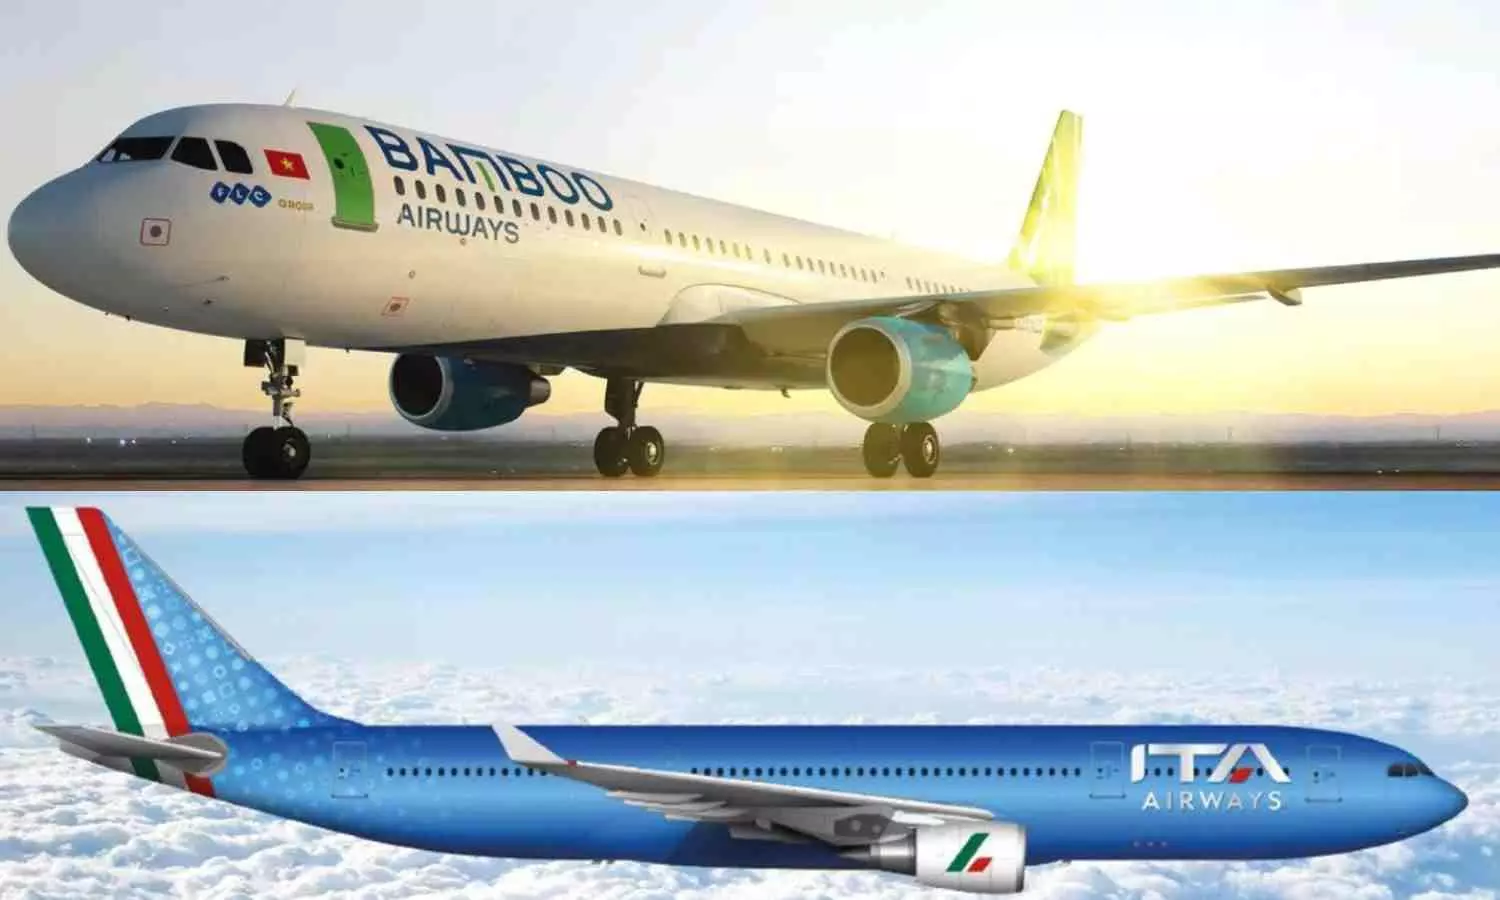 Group Concorde is the new GSA for ITA Airways, Bamboo Airways